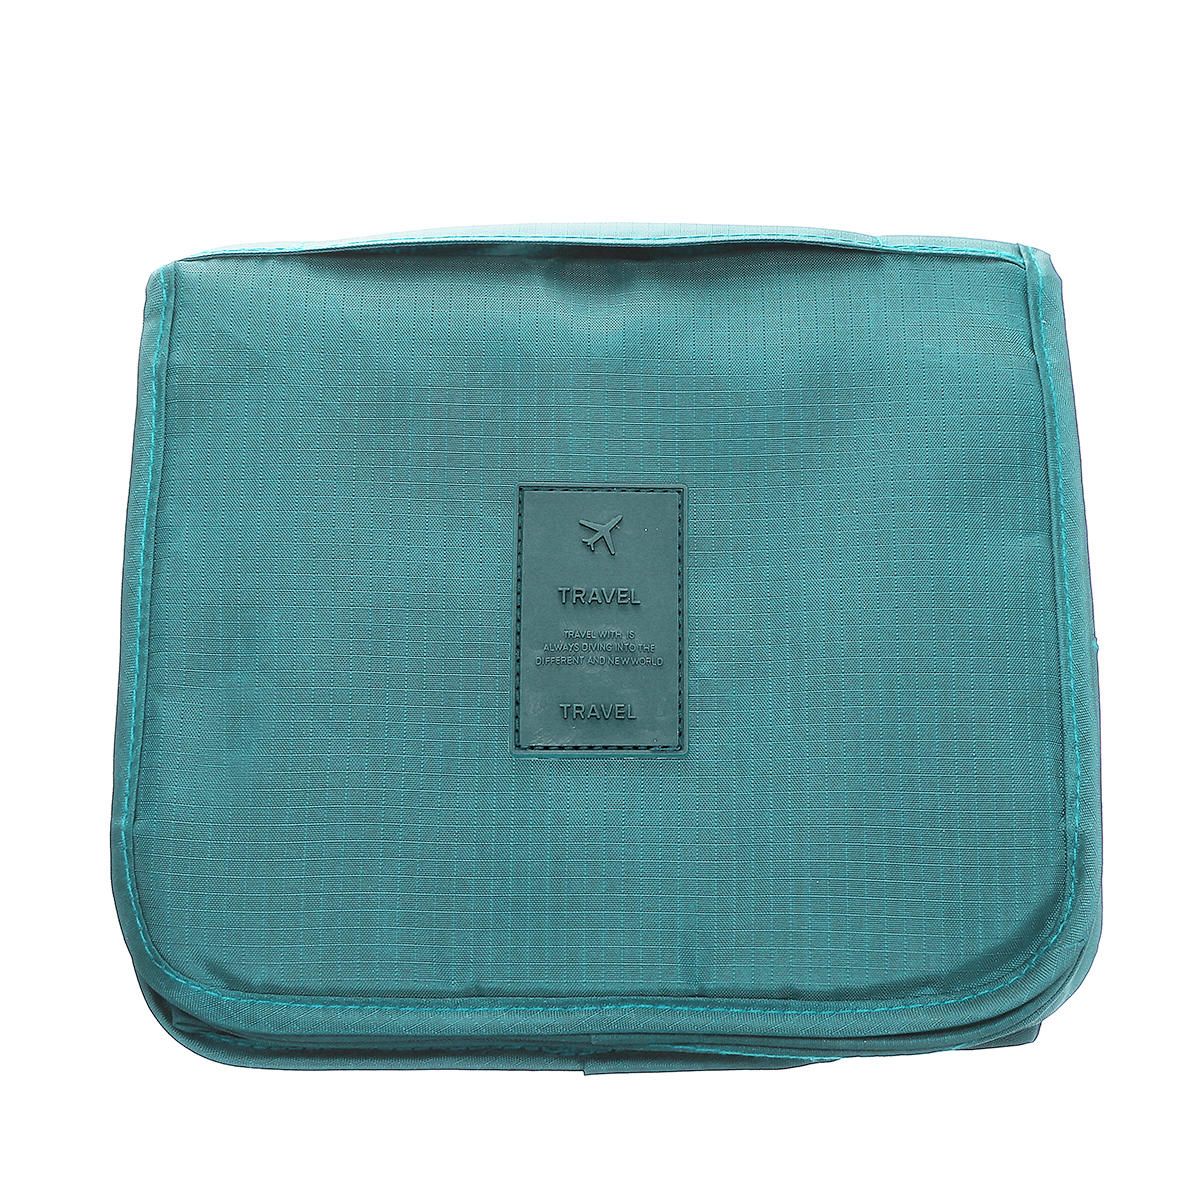 Solid-Color-Foldable-Travel-Bag-for-Toiletries-Hanging-Toiletry-Bag-Portable-Finishing-Cosmetic-Bag-1463909